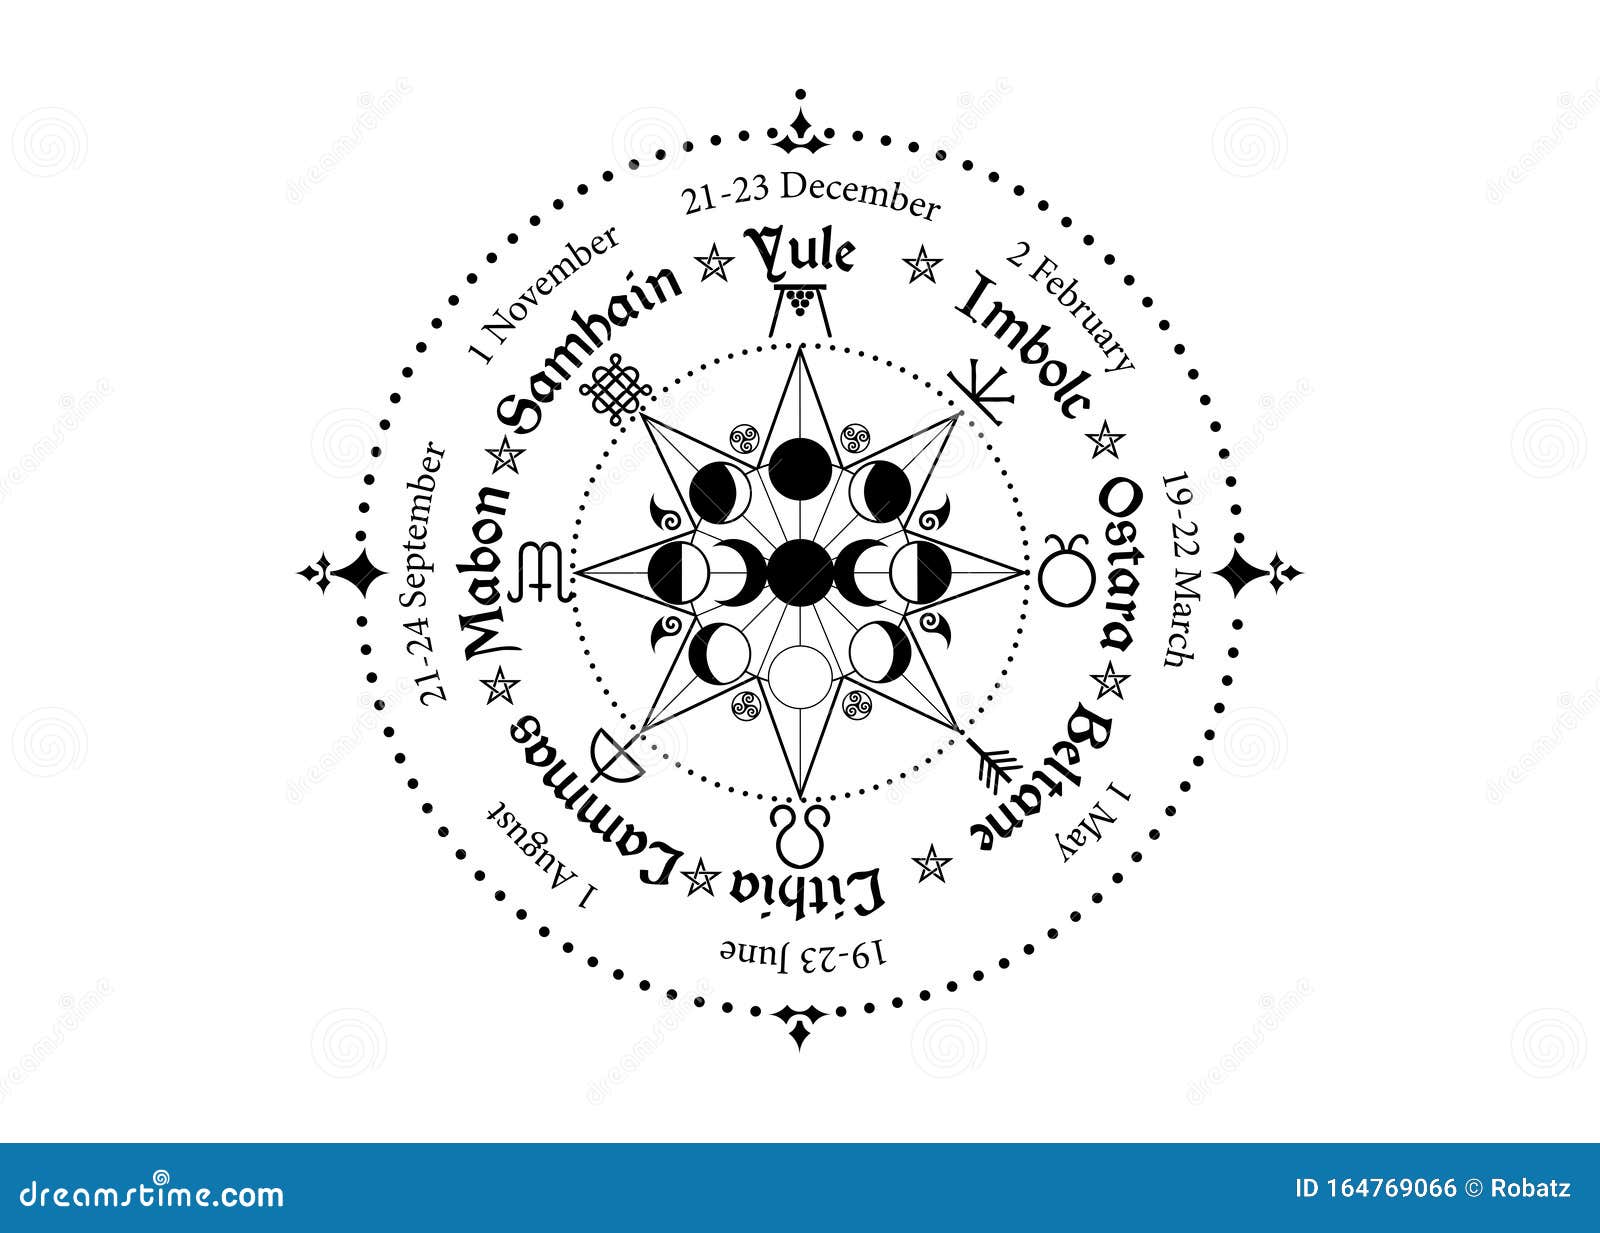 pagan holiday calendar 2021 Wheel Of The Year Is An Annual Cycle Of Seasonal Festivals Wiccan Calendar And Holidays Compass With Triple Moon Wicca Pagan Stock Vector Illustration Of Ritual Illustration 164769066 pagan holiday calendar 2021